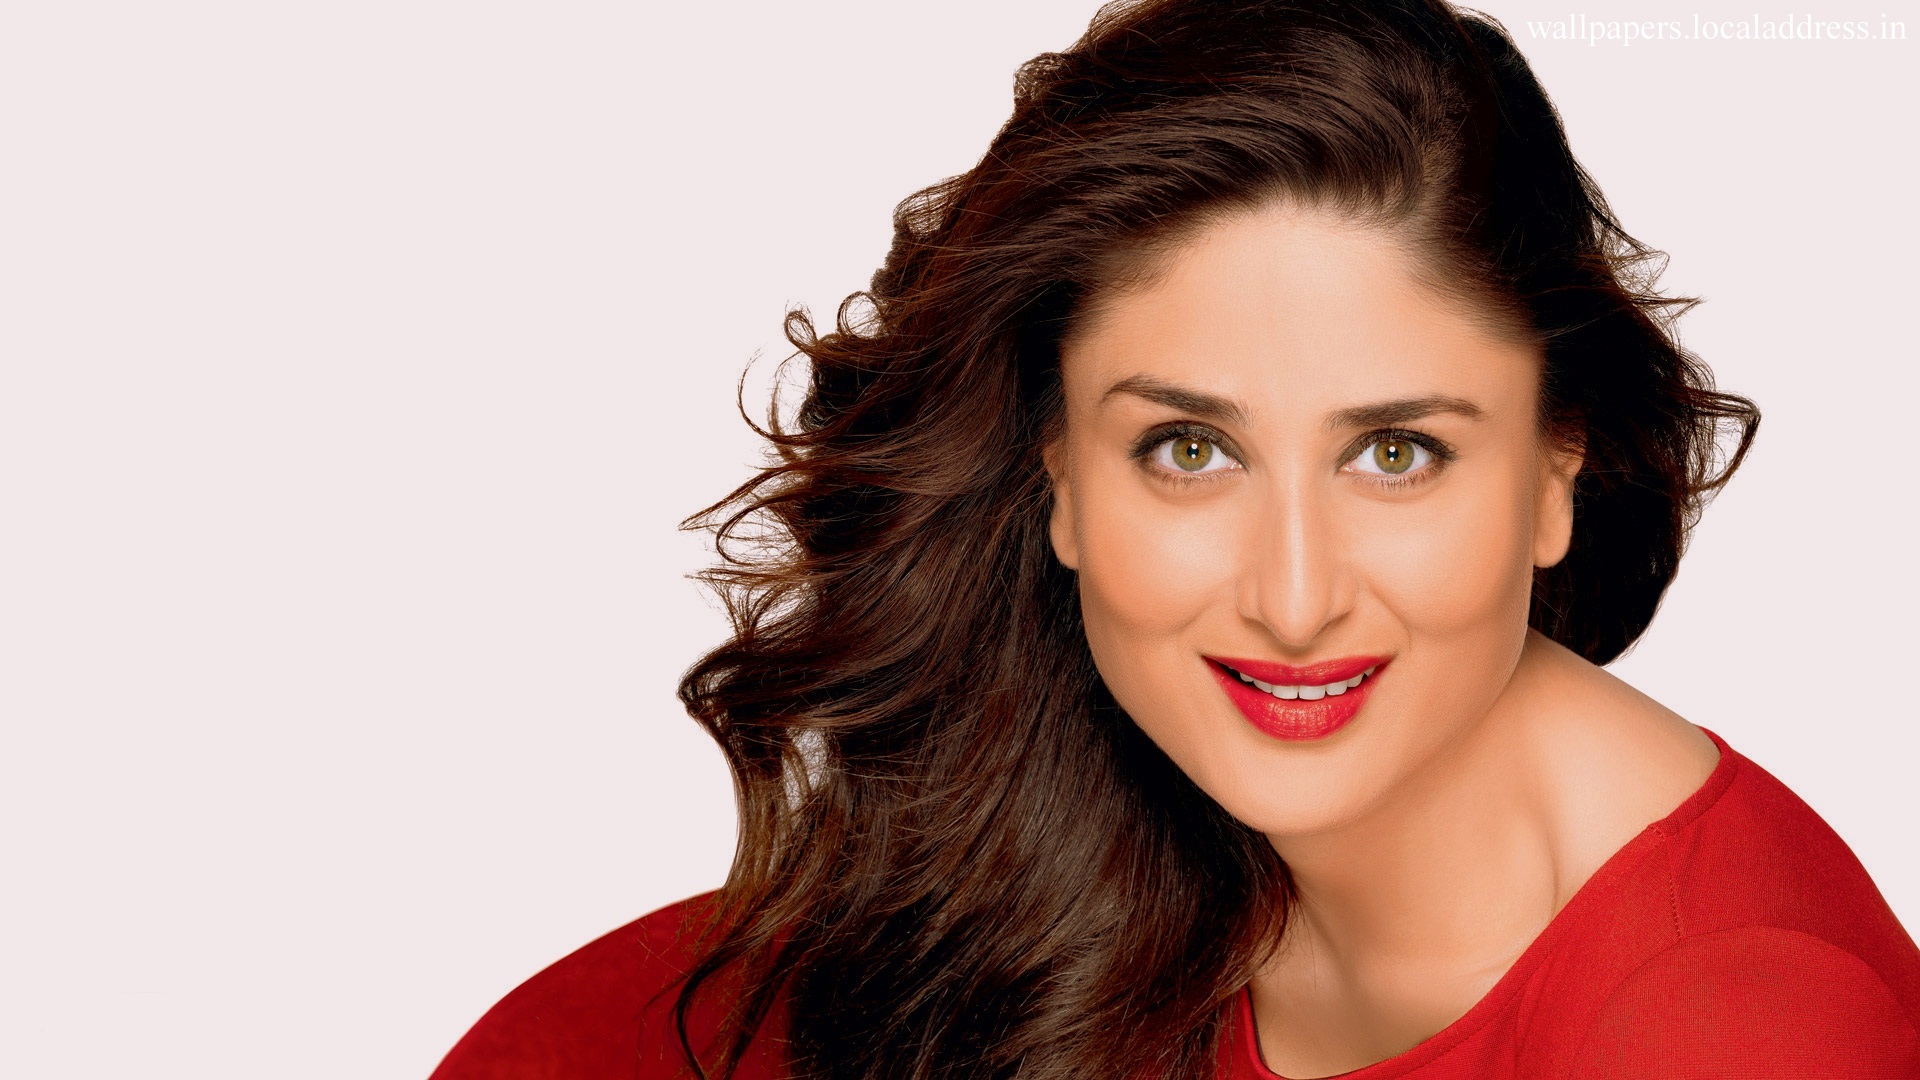 20 Best Of Kareena Kapoor Wallpapers That Are Too Hot To Handle